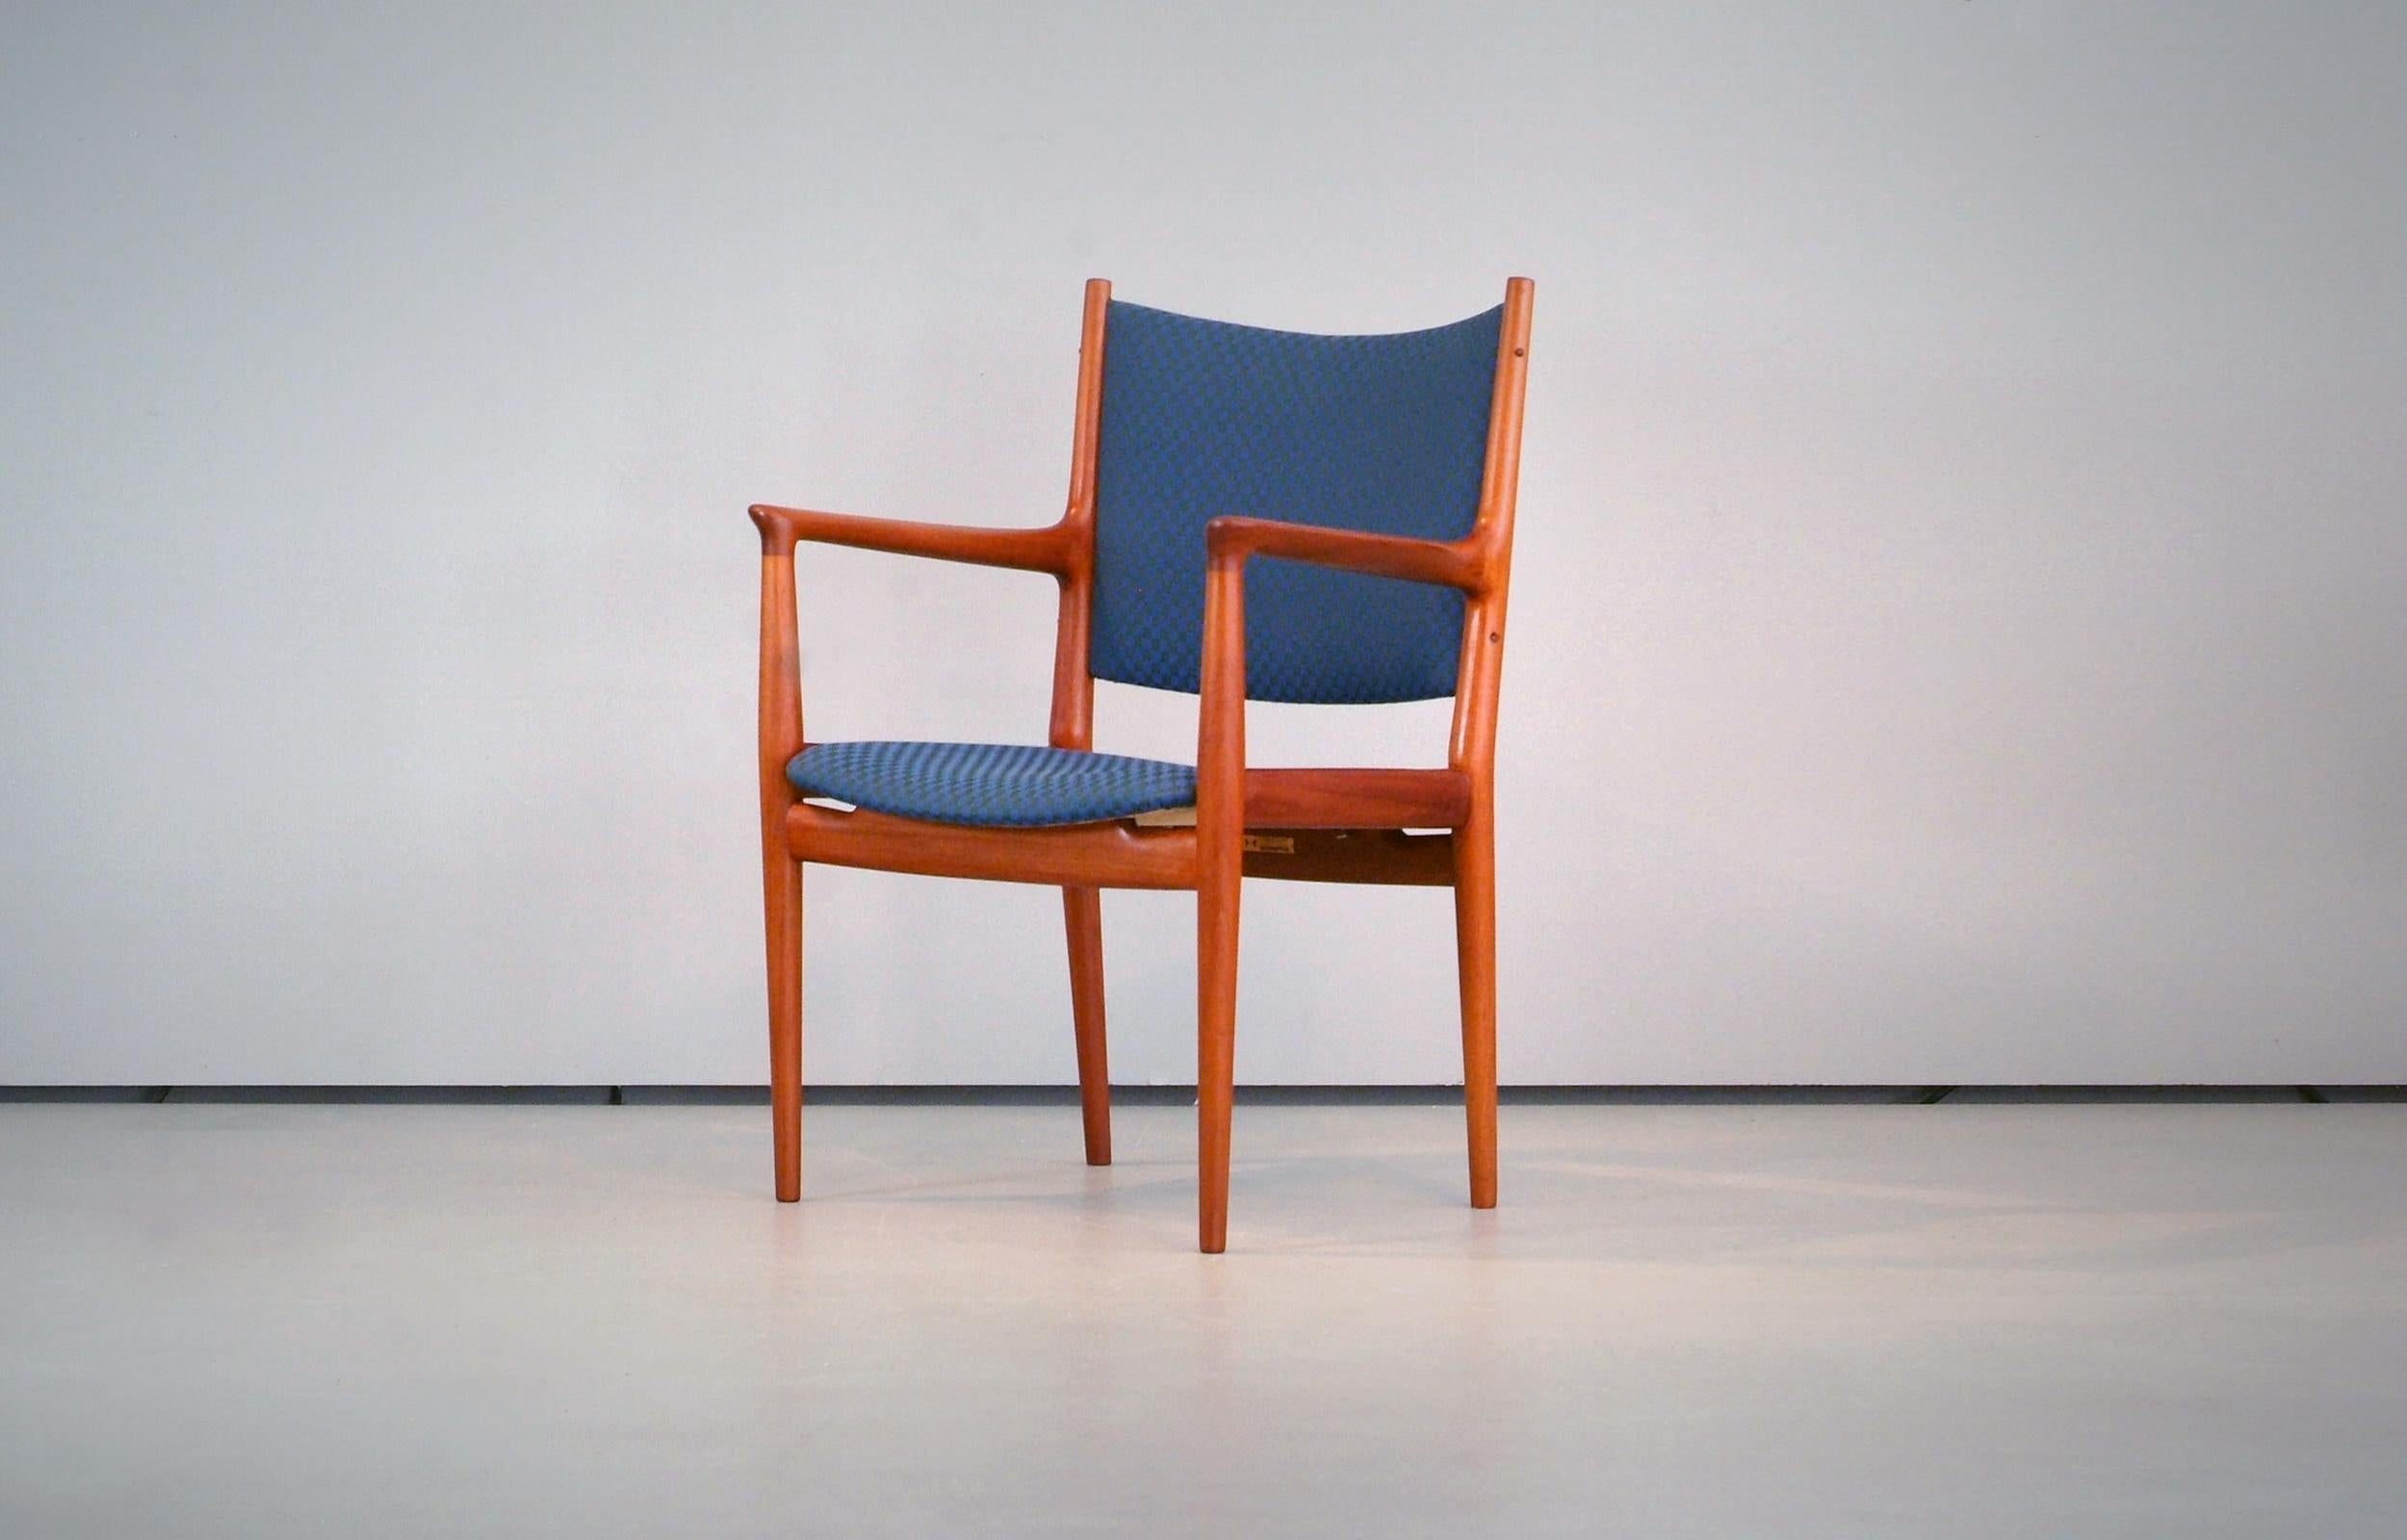 Wonderful Hans J. Wegner JH 513 Chairs (2) made by Johannes Hansen, Denmark. Beautiful grained teak frame with original blue pattern fabric upholstery. Teak frame prof. restored.

Normal wear consistent with age and use.

 